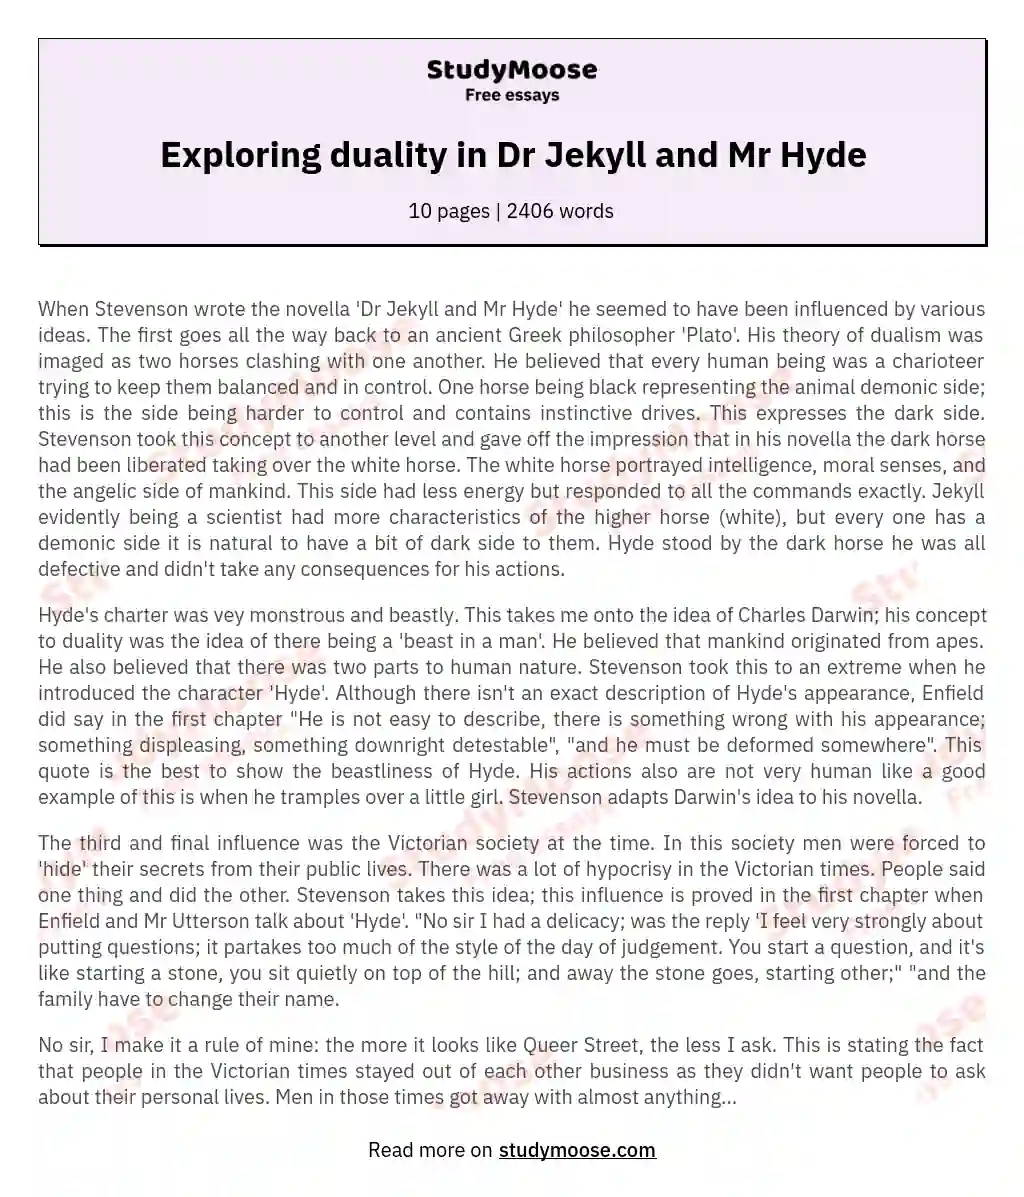 Exploring duality in Dr Jekyll and Mr Hyde essay